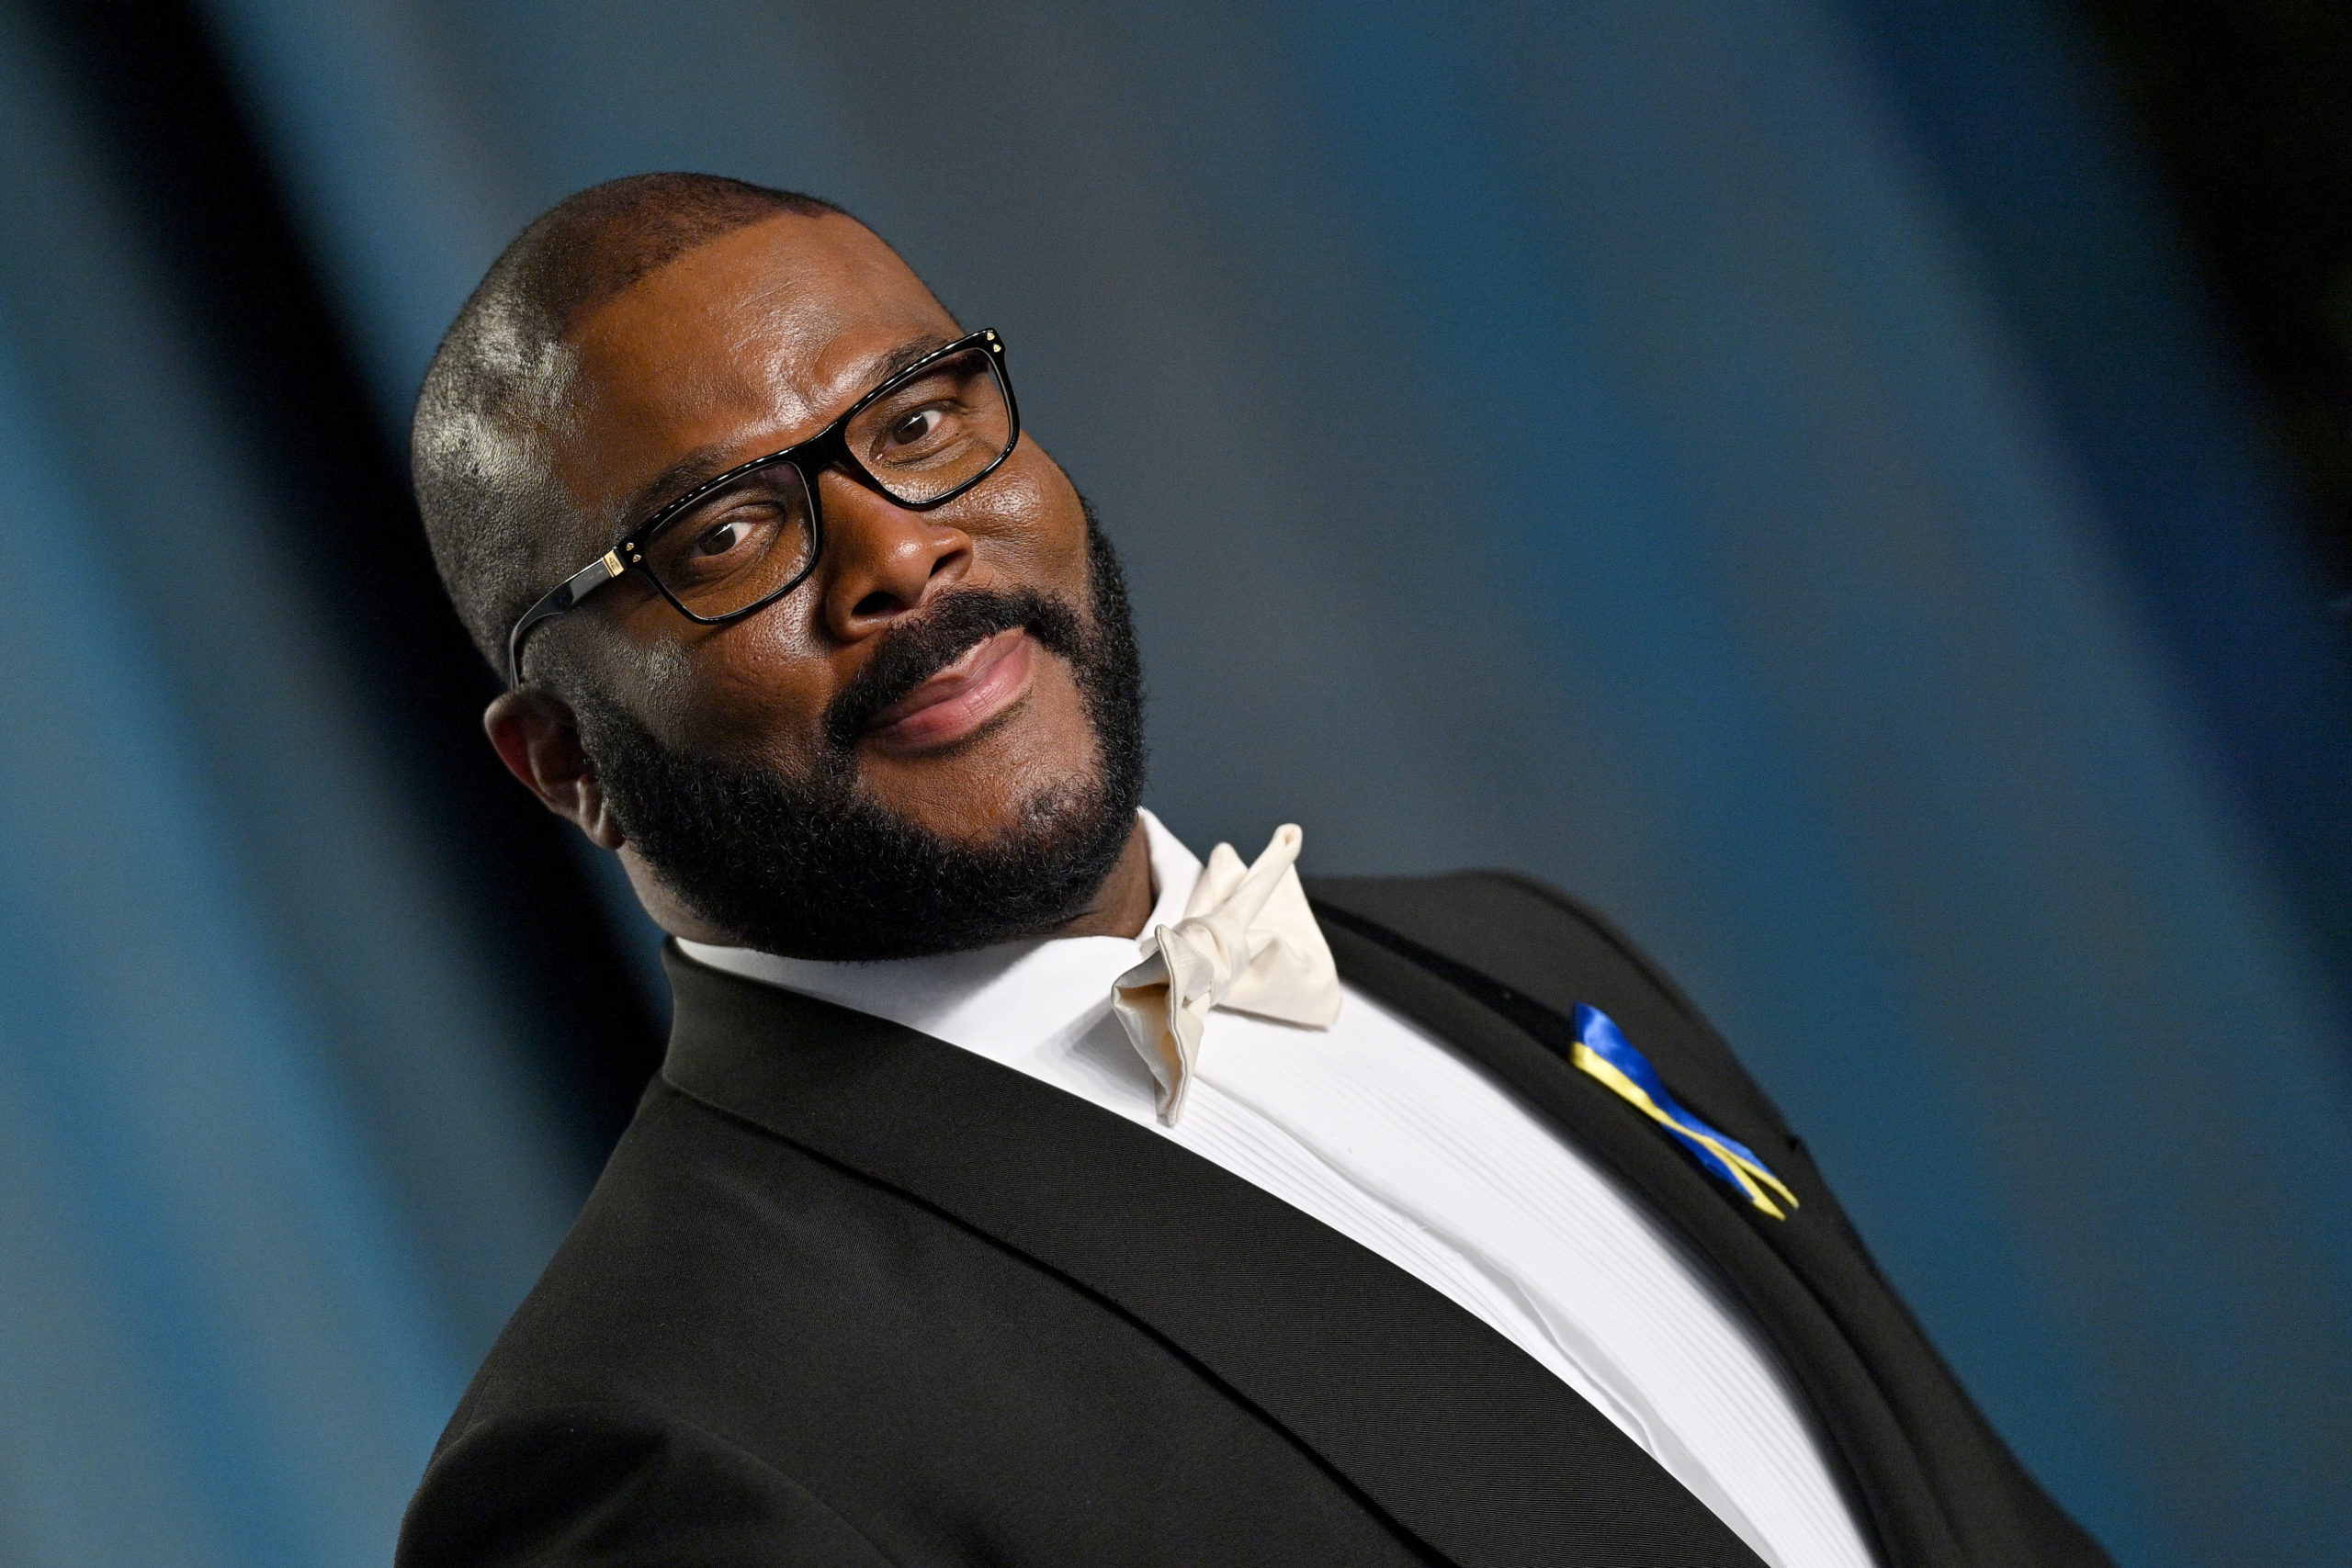 Tyler Perry To Donate $750K To Pay Property Taxes For Senior Citizens Living Near His Atlanta Studio